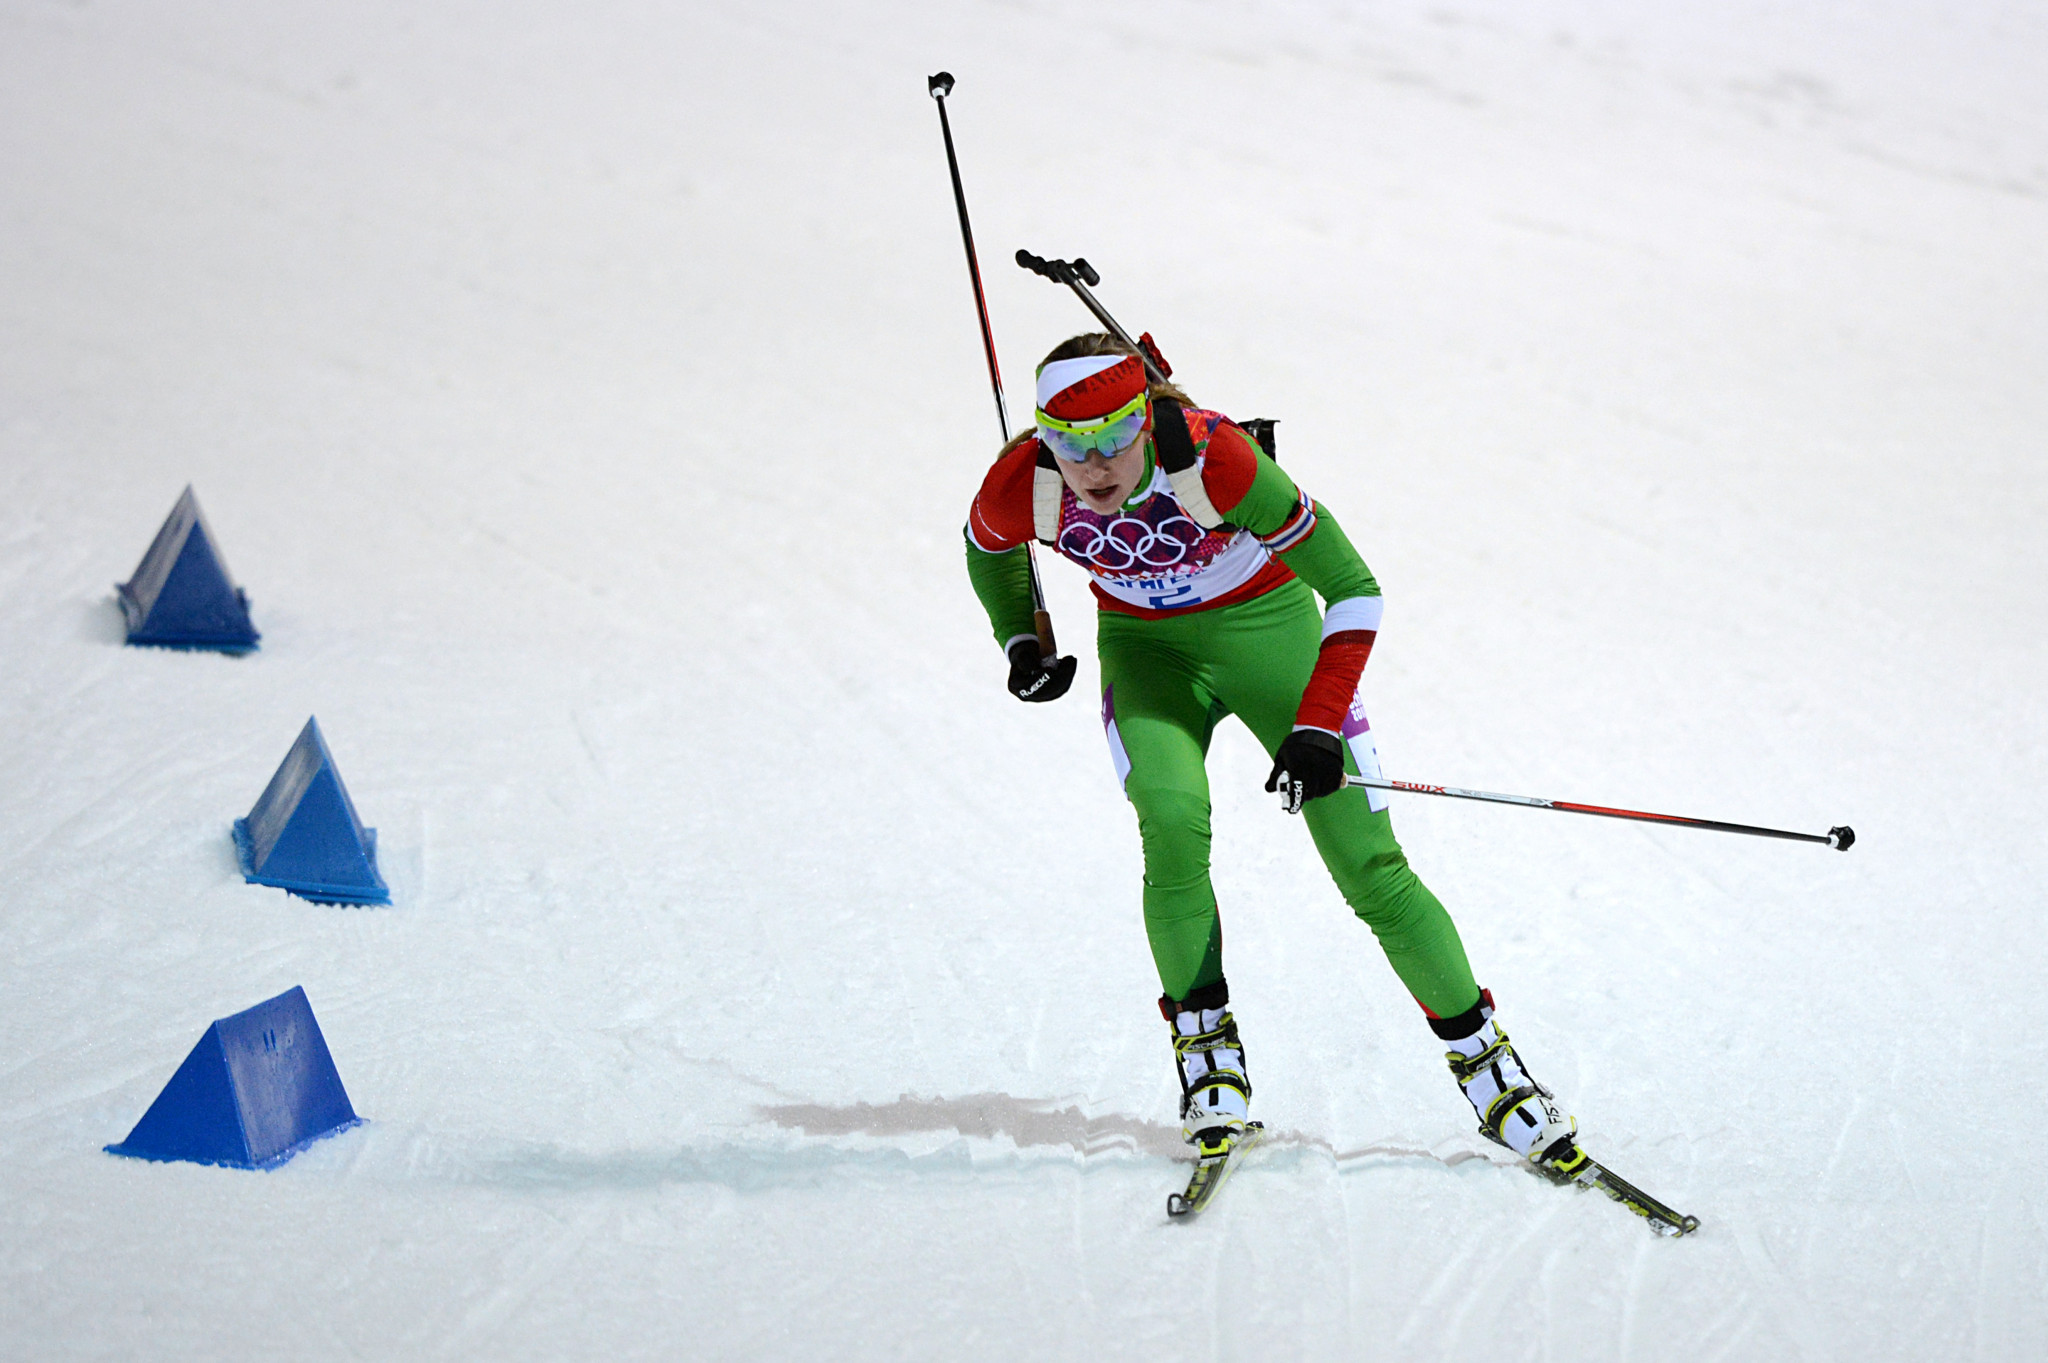 IBU to reject applications for Russians and Belarusians to compete as neutrals